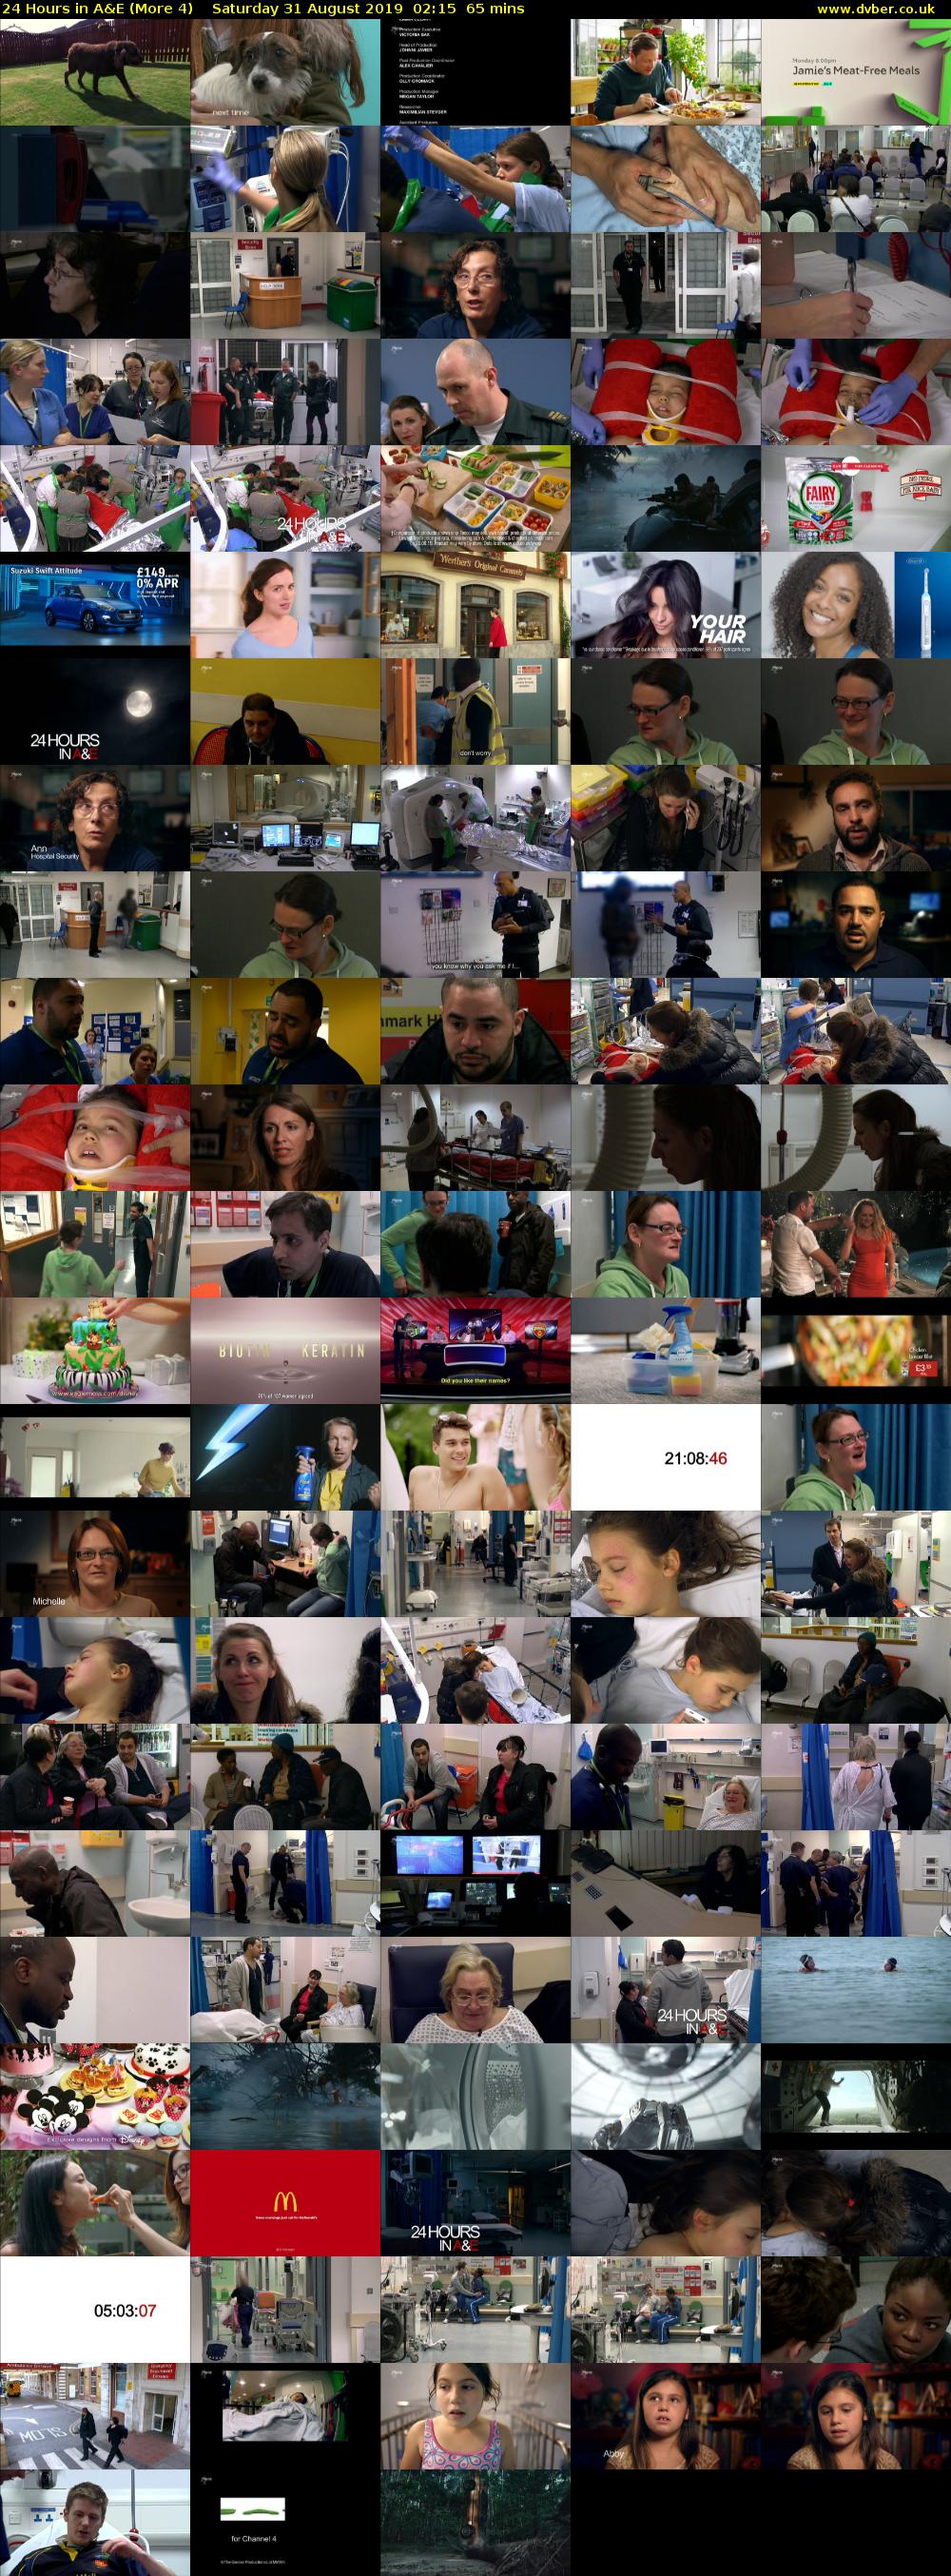 24 Hours in A&E (More 4) Saturday 31 August 2019 02:15 - 03:20